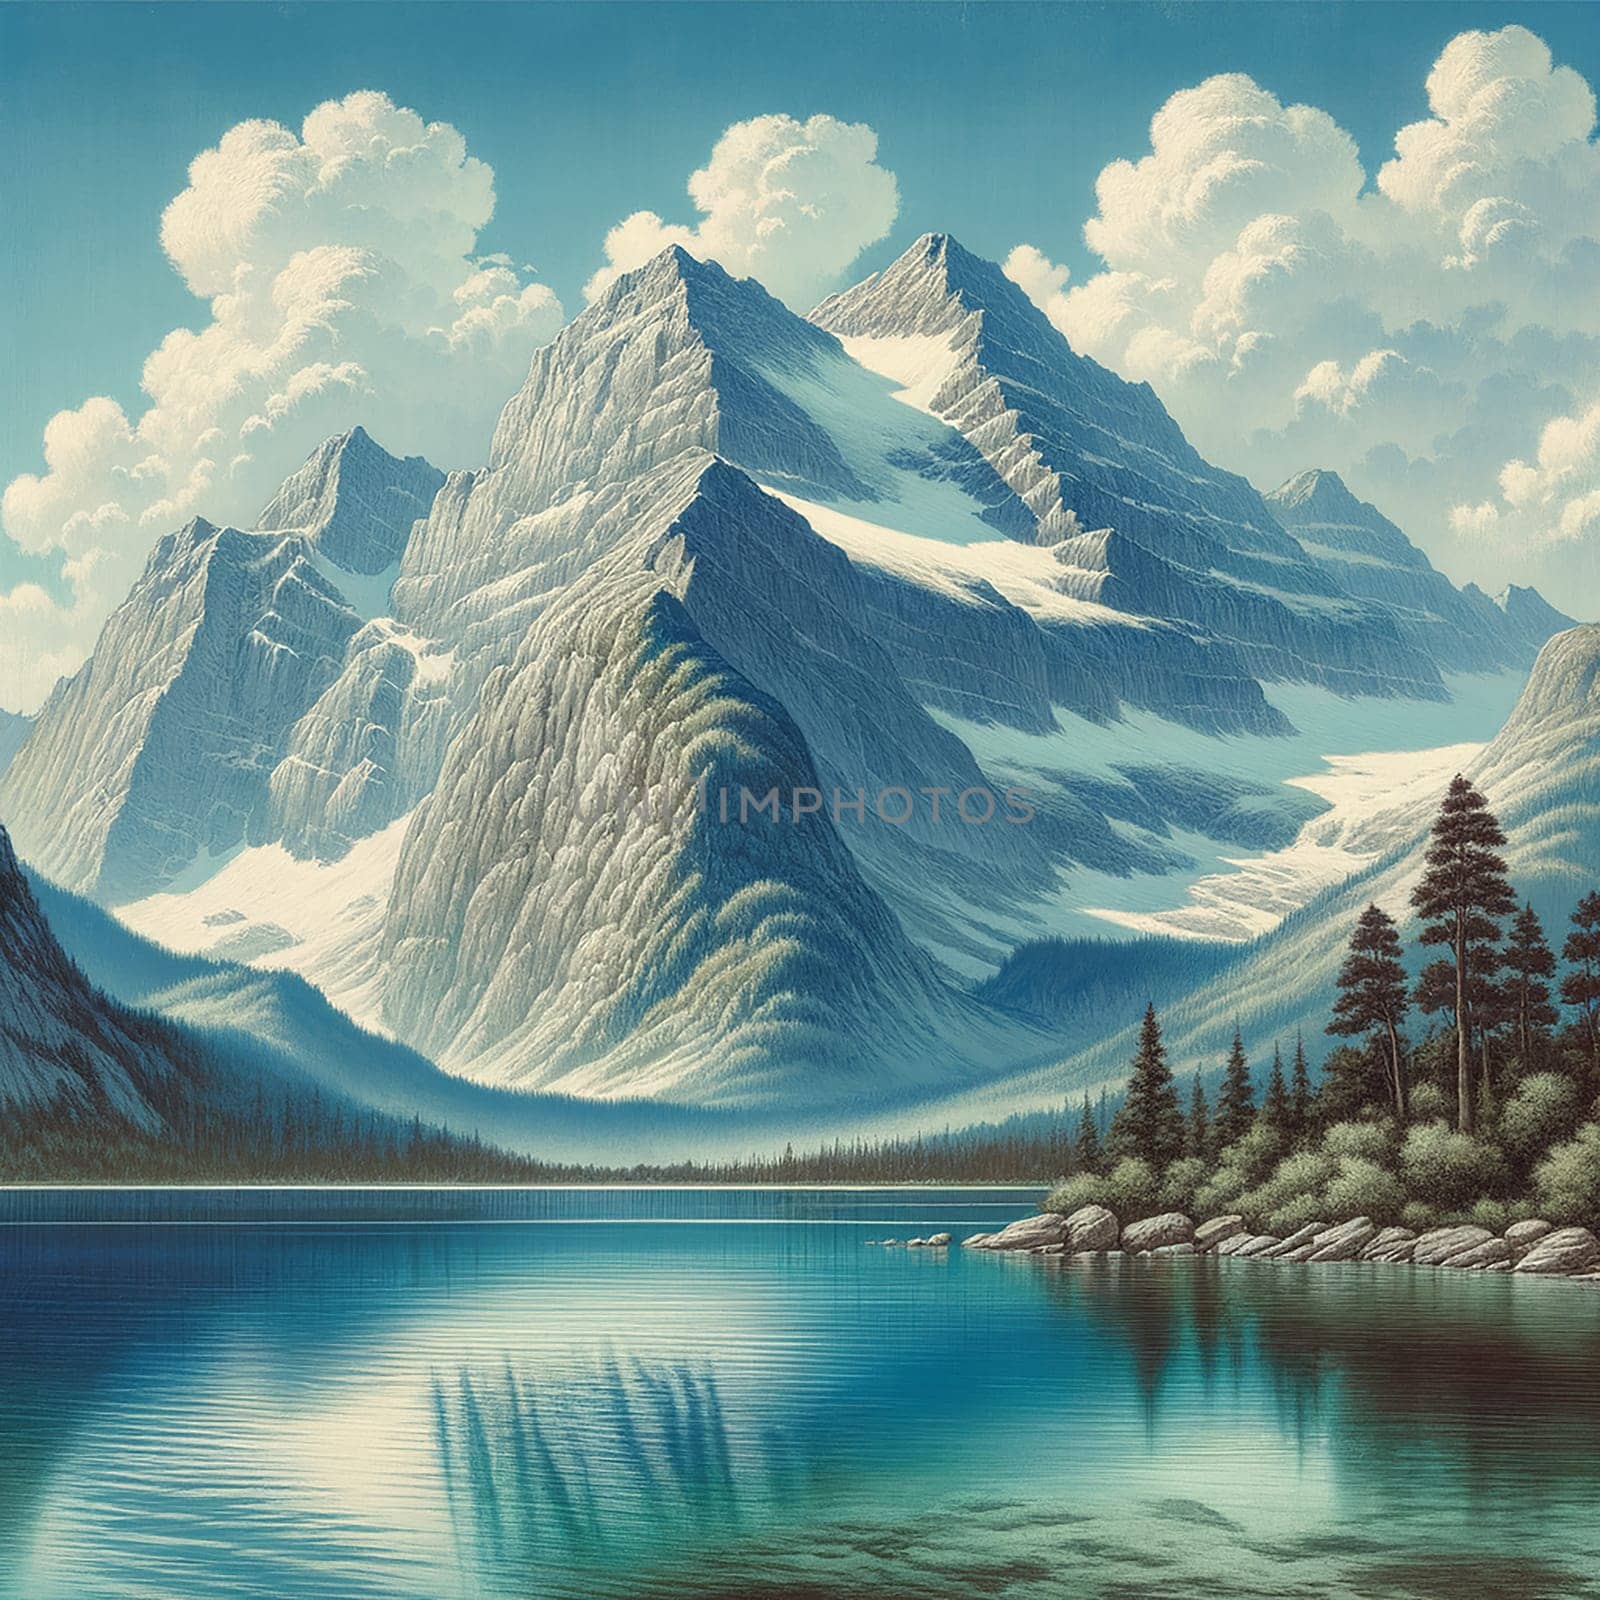 Mountain Majesty: A Tranquil Lake Painting" by Petrichor